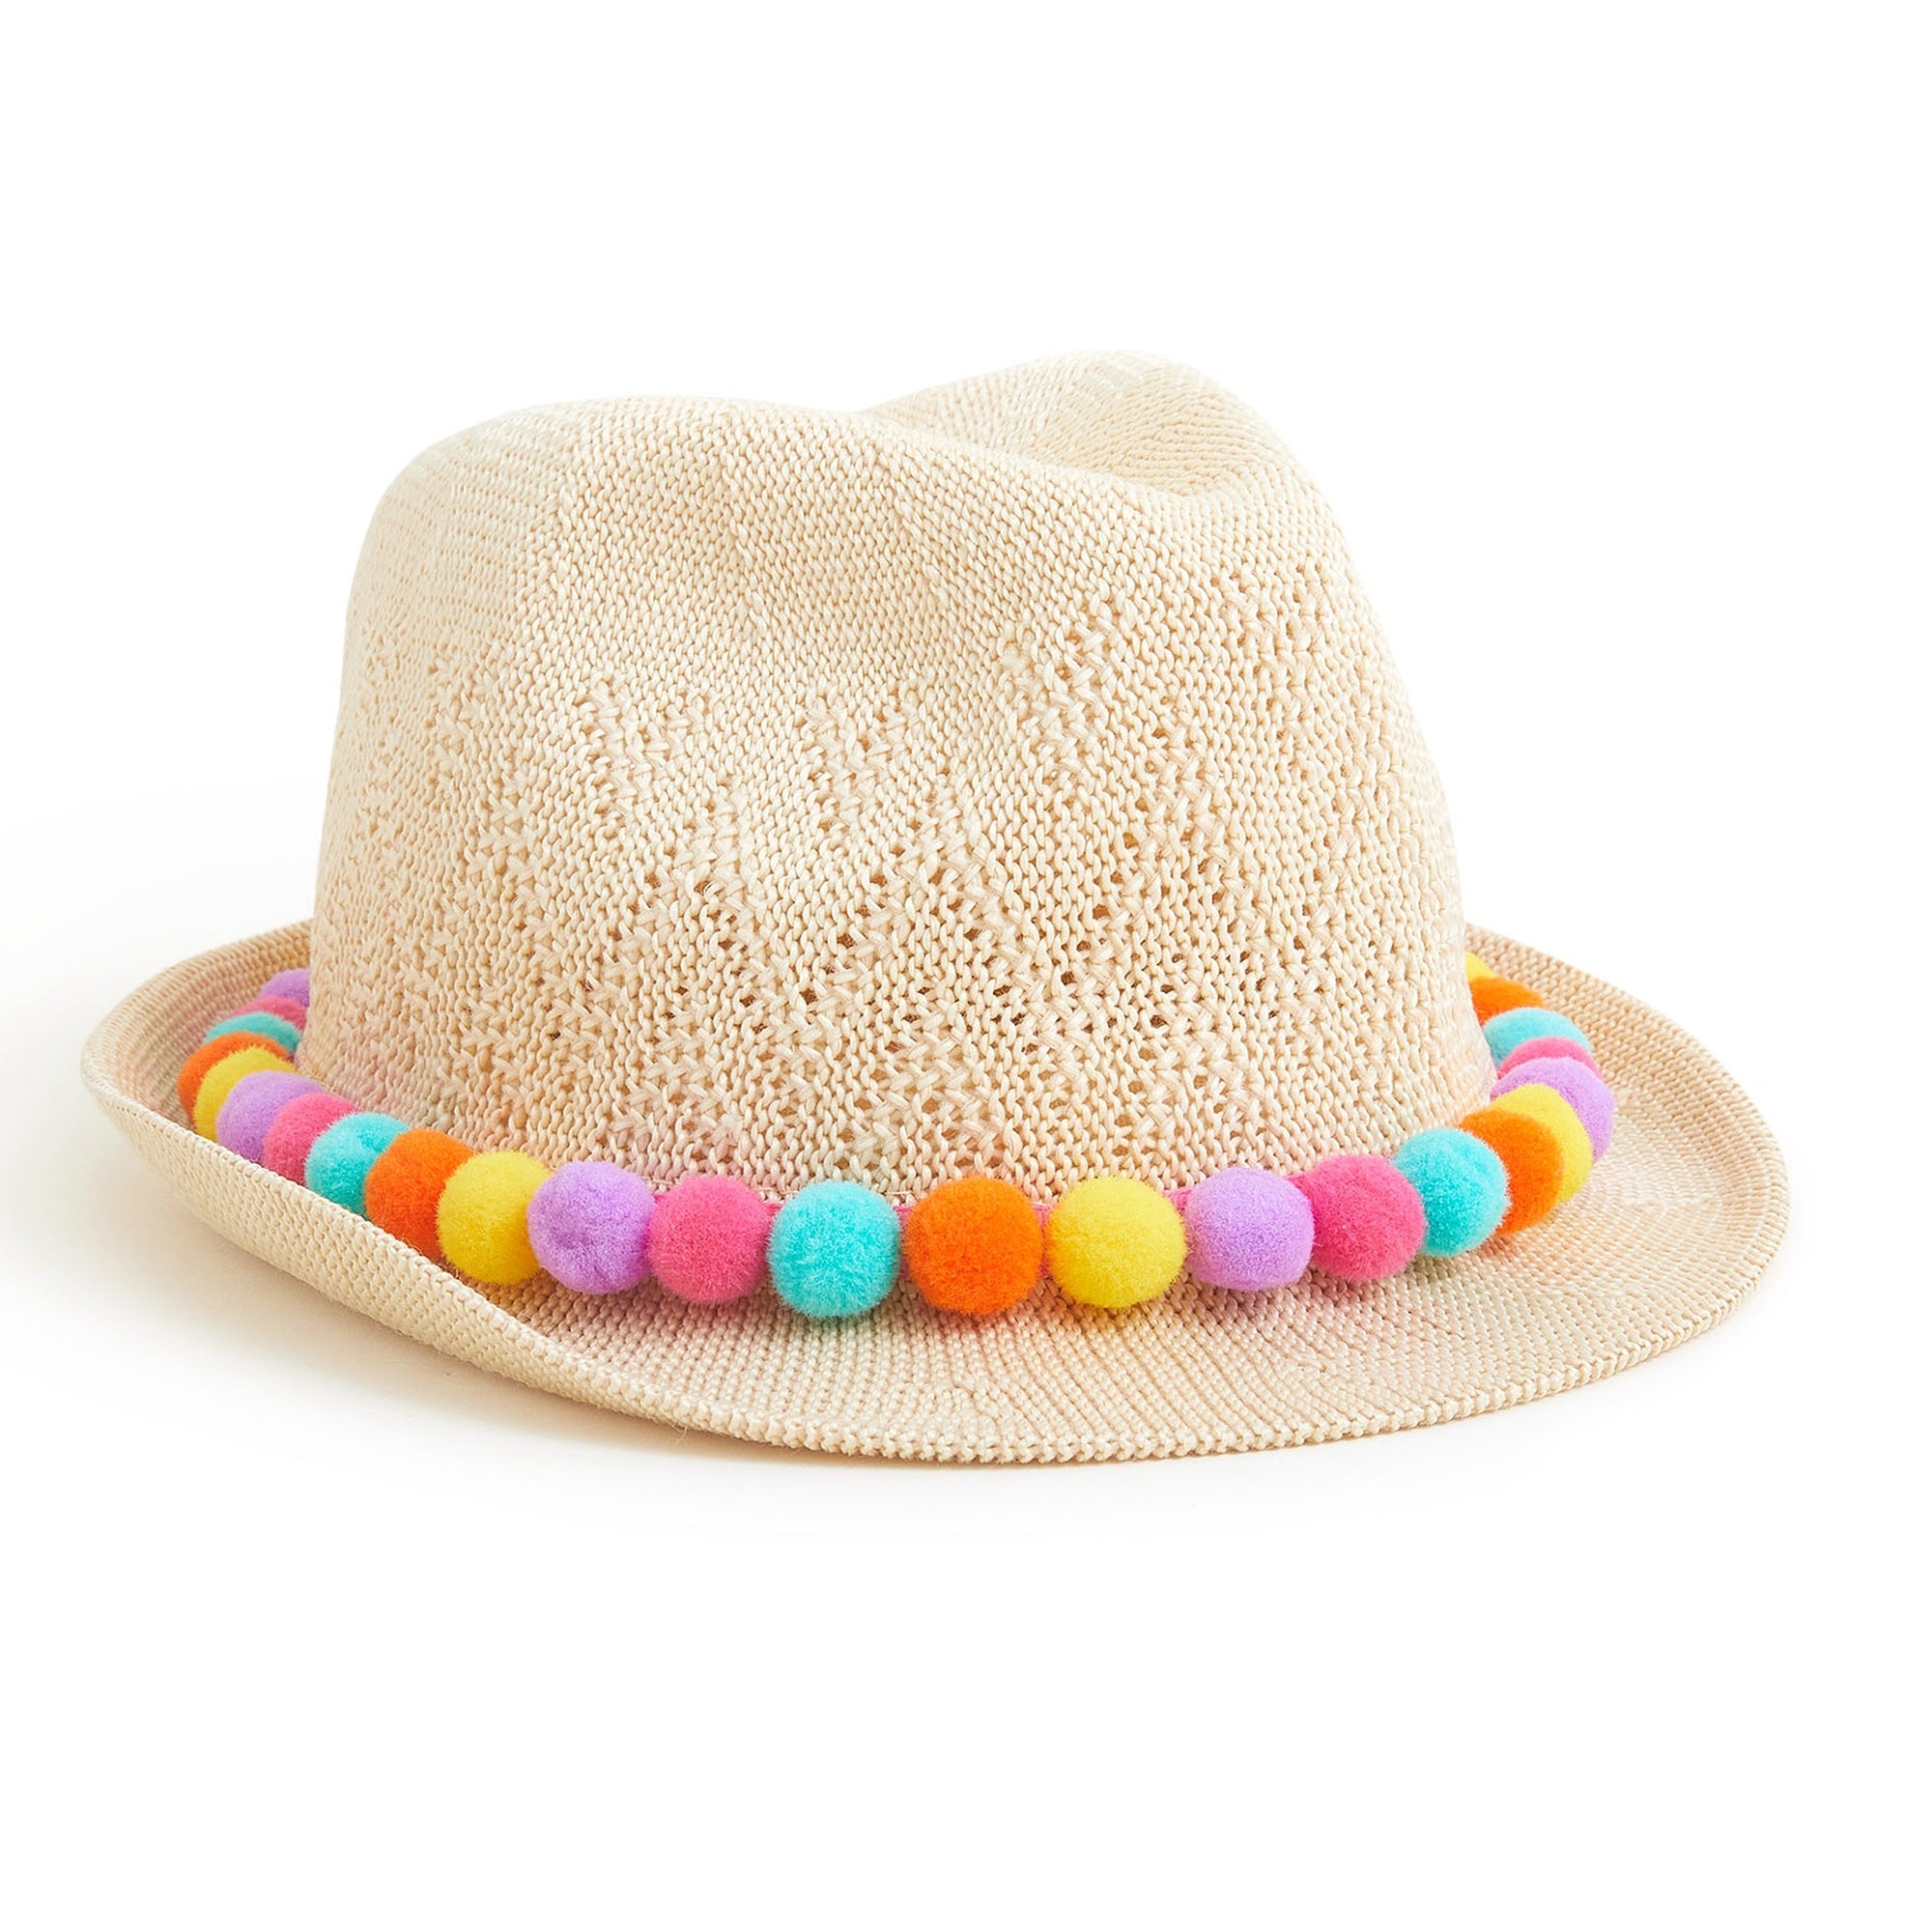 Accessorize London Girl's Pom Pom Packable Trilby 7-12 Years